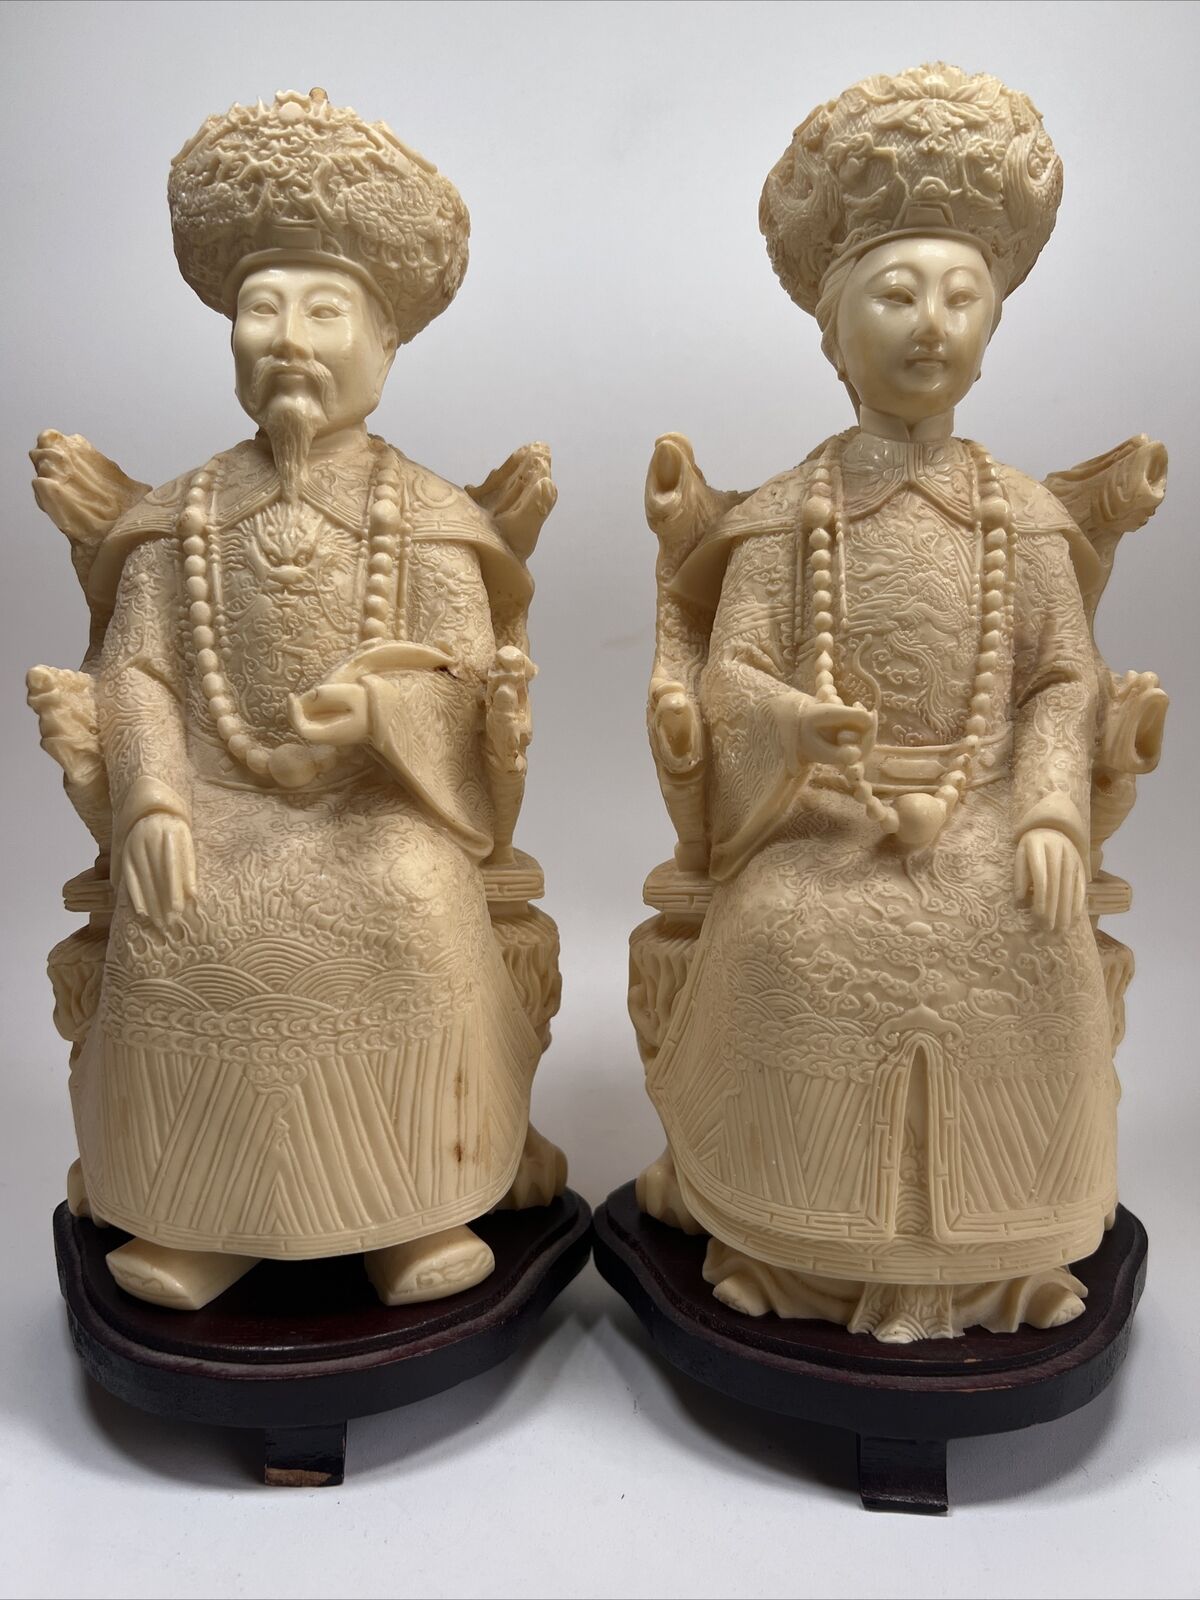 Vintage Chinese Emperor and Empress Hand-Carved  Resin Figures & Base 13”